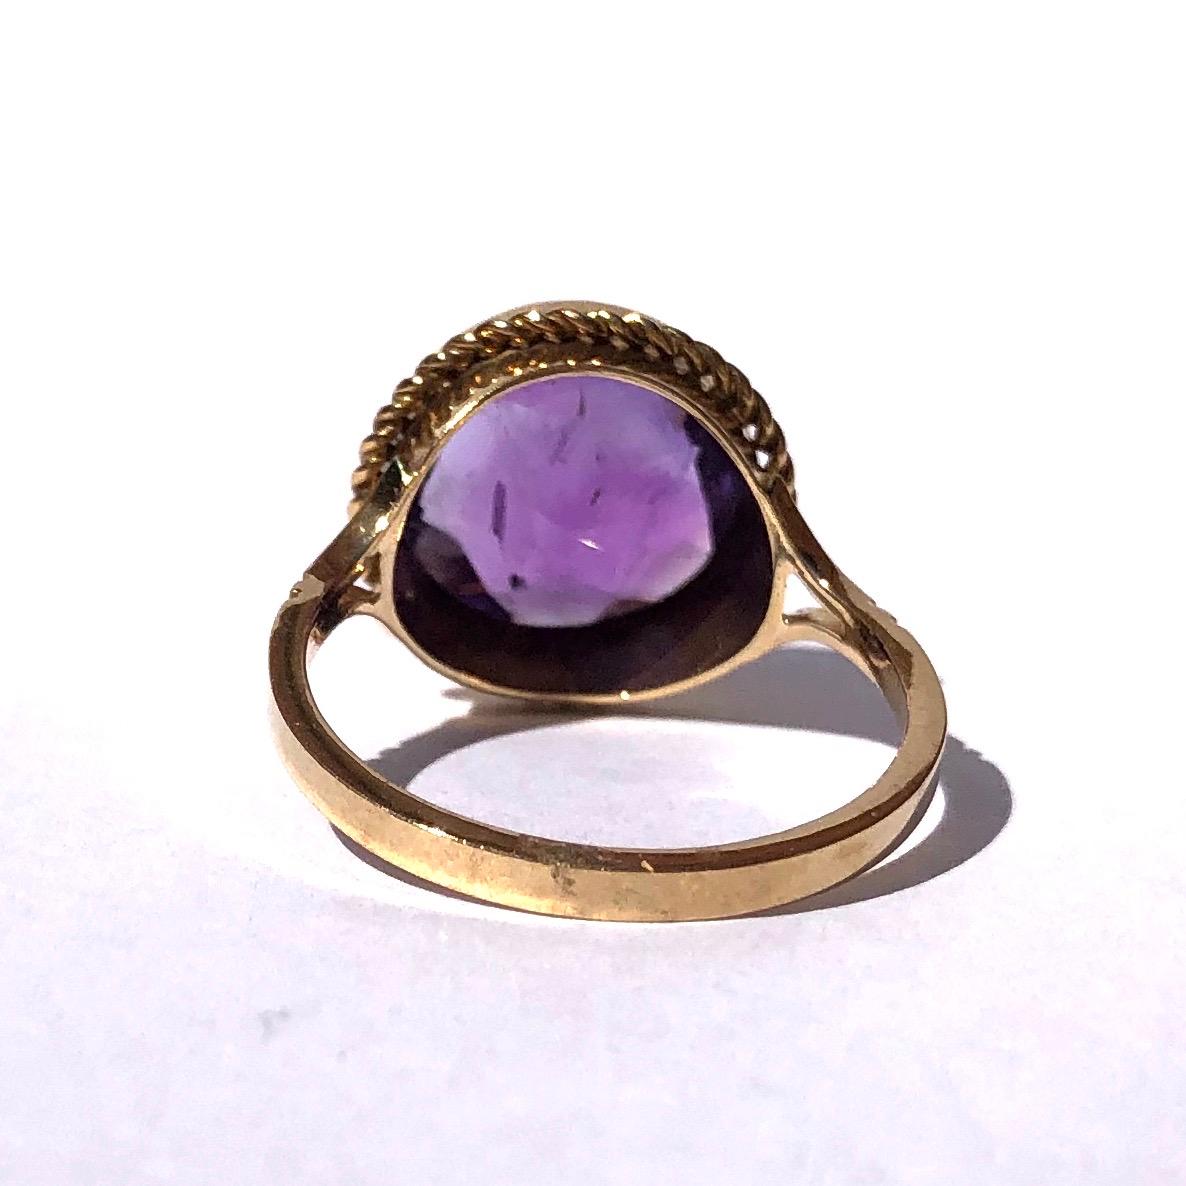 Edwardian Antique Amethyst and 9 Carat Gold Ring